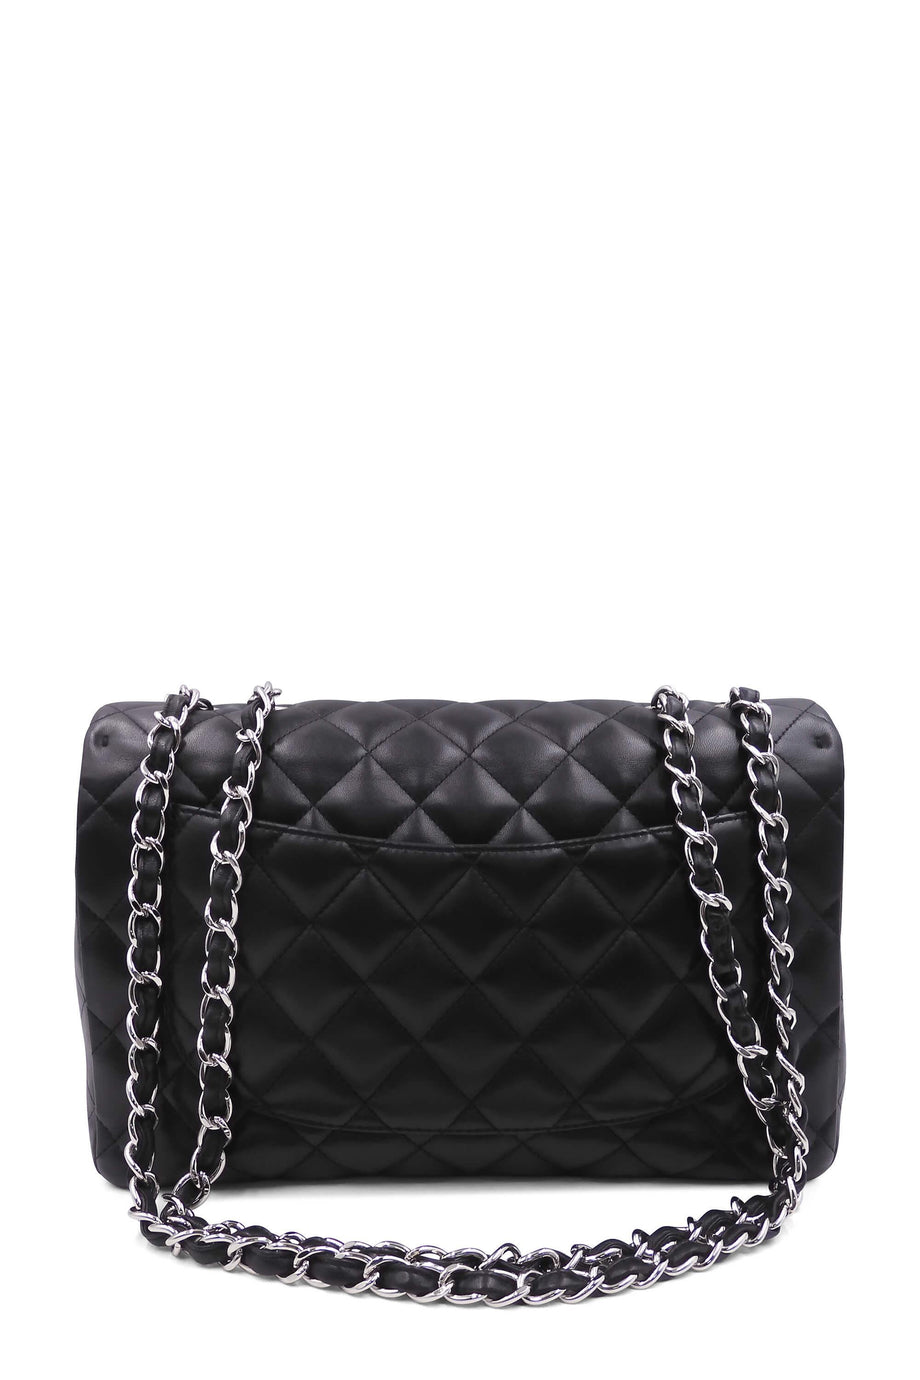 Quilted Lambskin Jumbo Classic Flap Bag Black with Silver Hardware